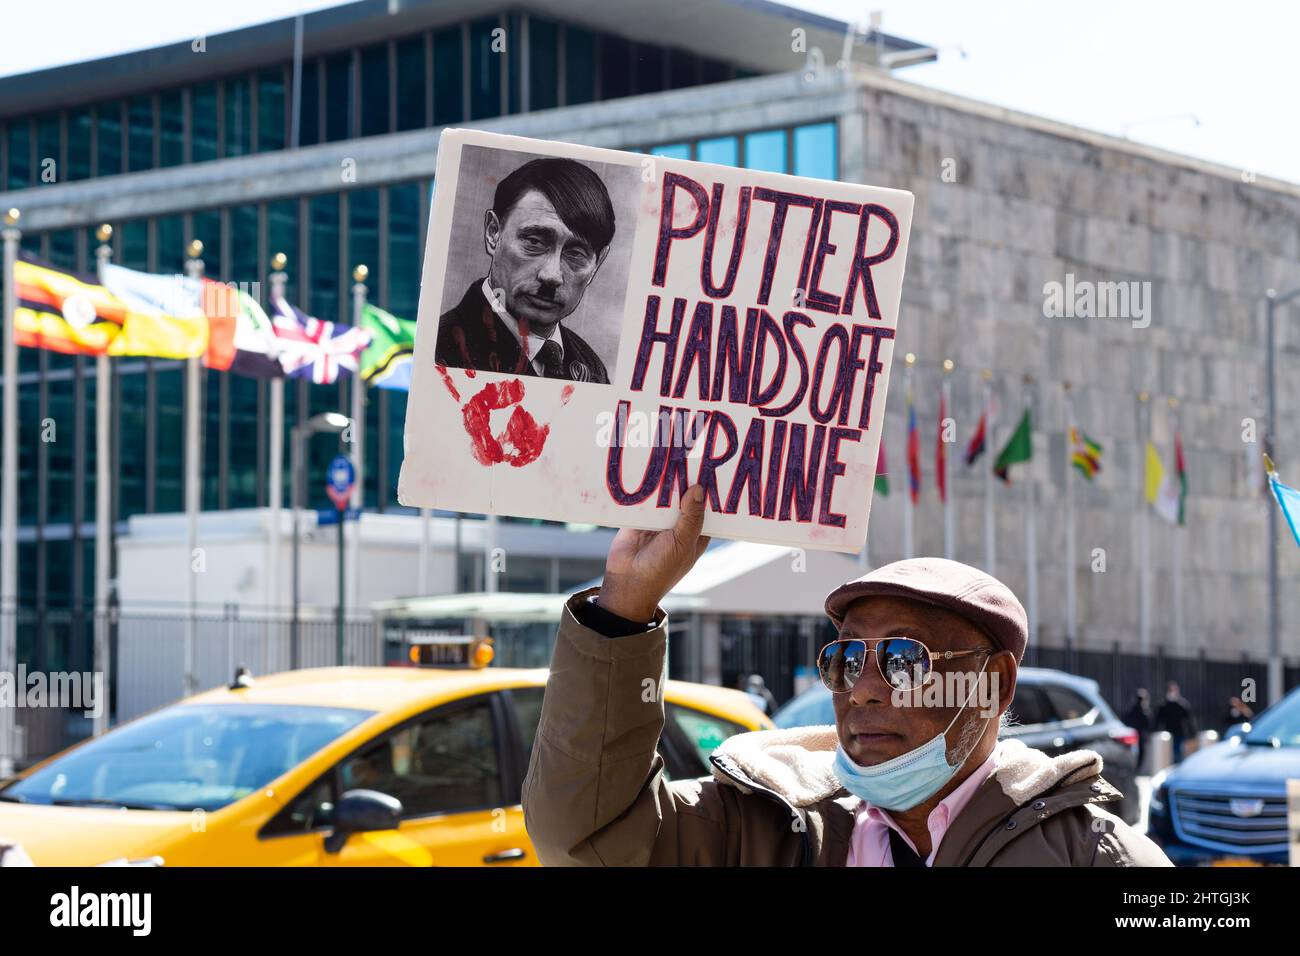 New York, NY, USA. 28th Feb, 2022. Pro-Ukrainian protesters face the United Nations from across First Avenue. A man carries a sign with a photo of Putin with a haircut and mustache like Adolf Hitler's, and which reads “Putler [sic.] Hands Off Ukraine.” Credit: Ed Lefkowicz/Alamy Live News Stock Photo